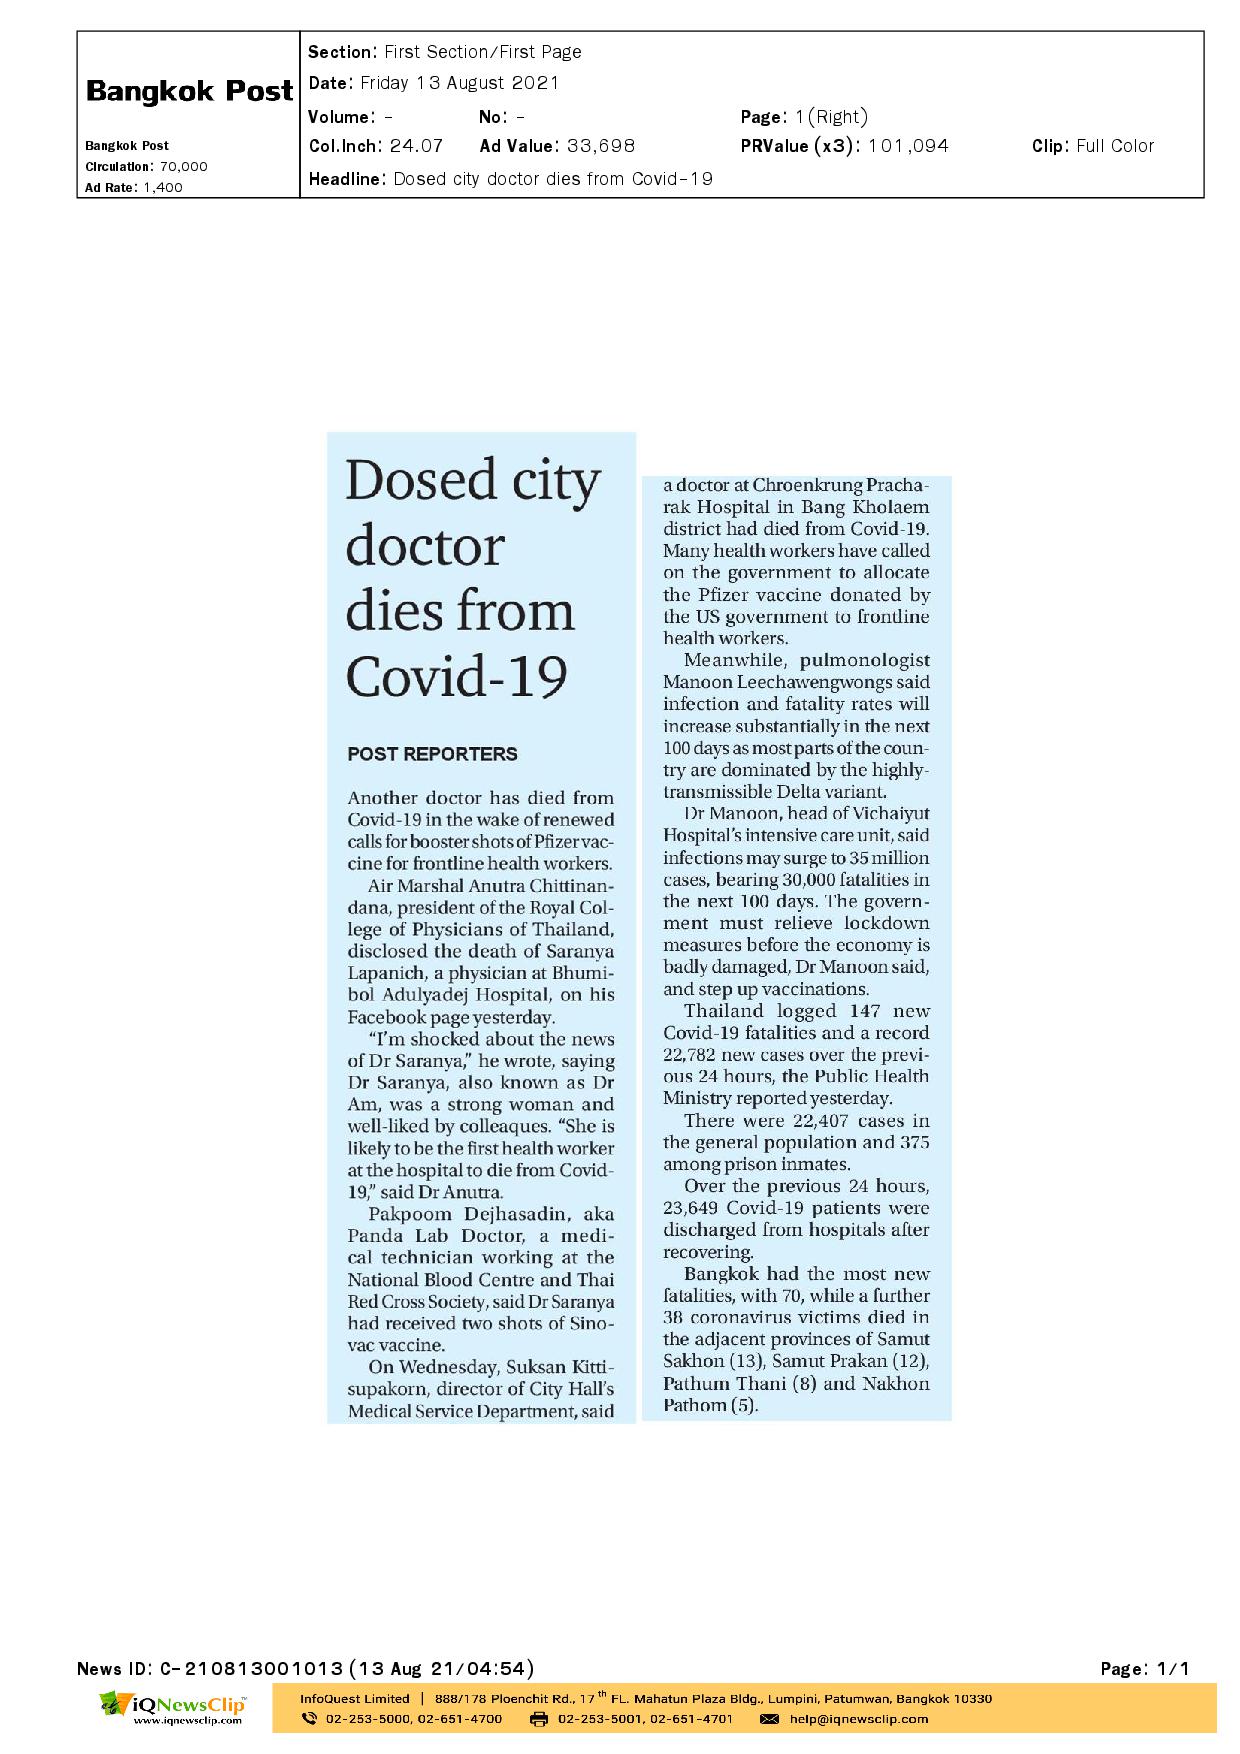 Dosed city doctor dies from Covid-19